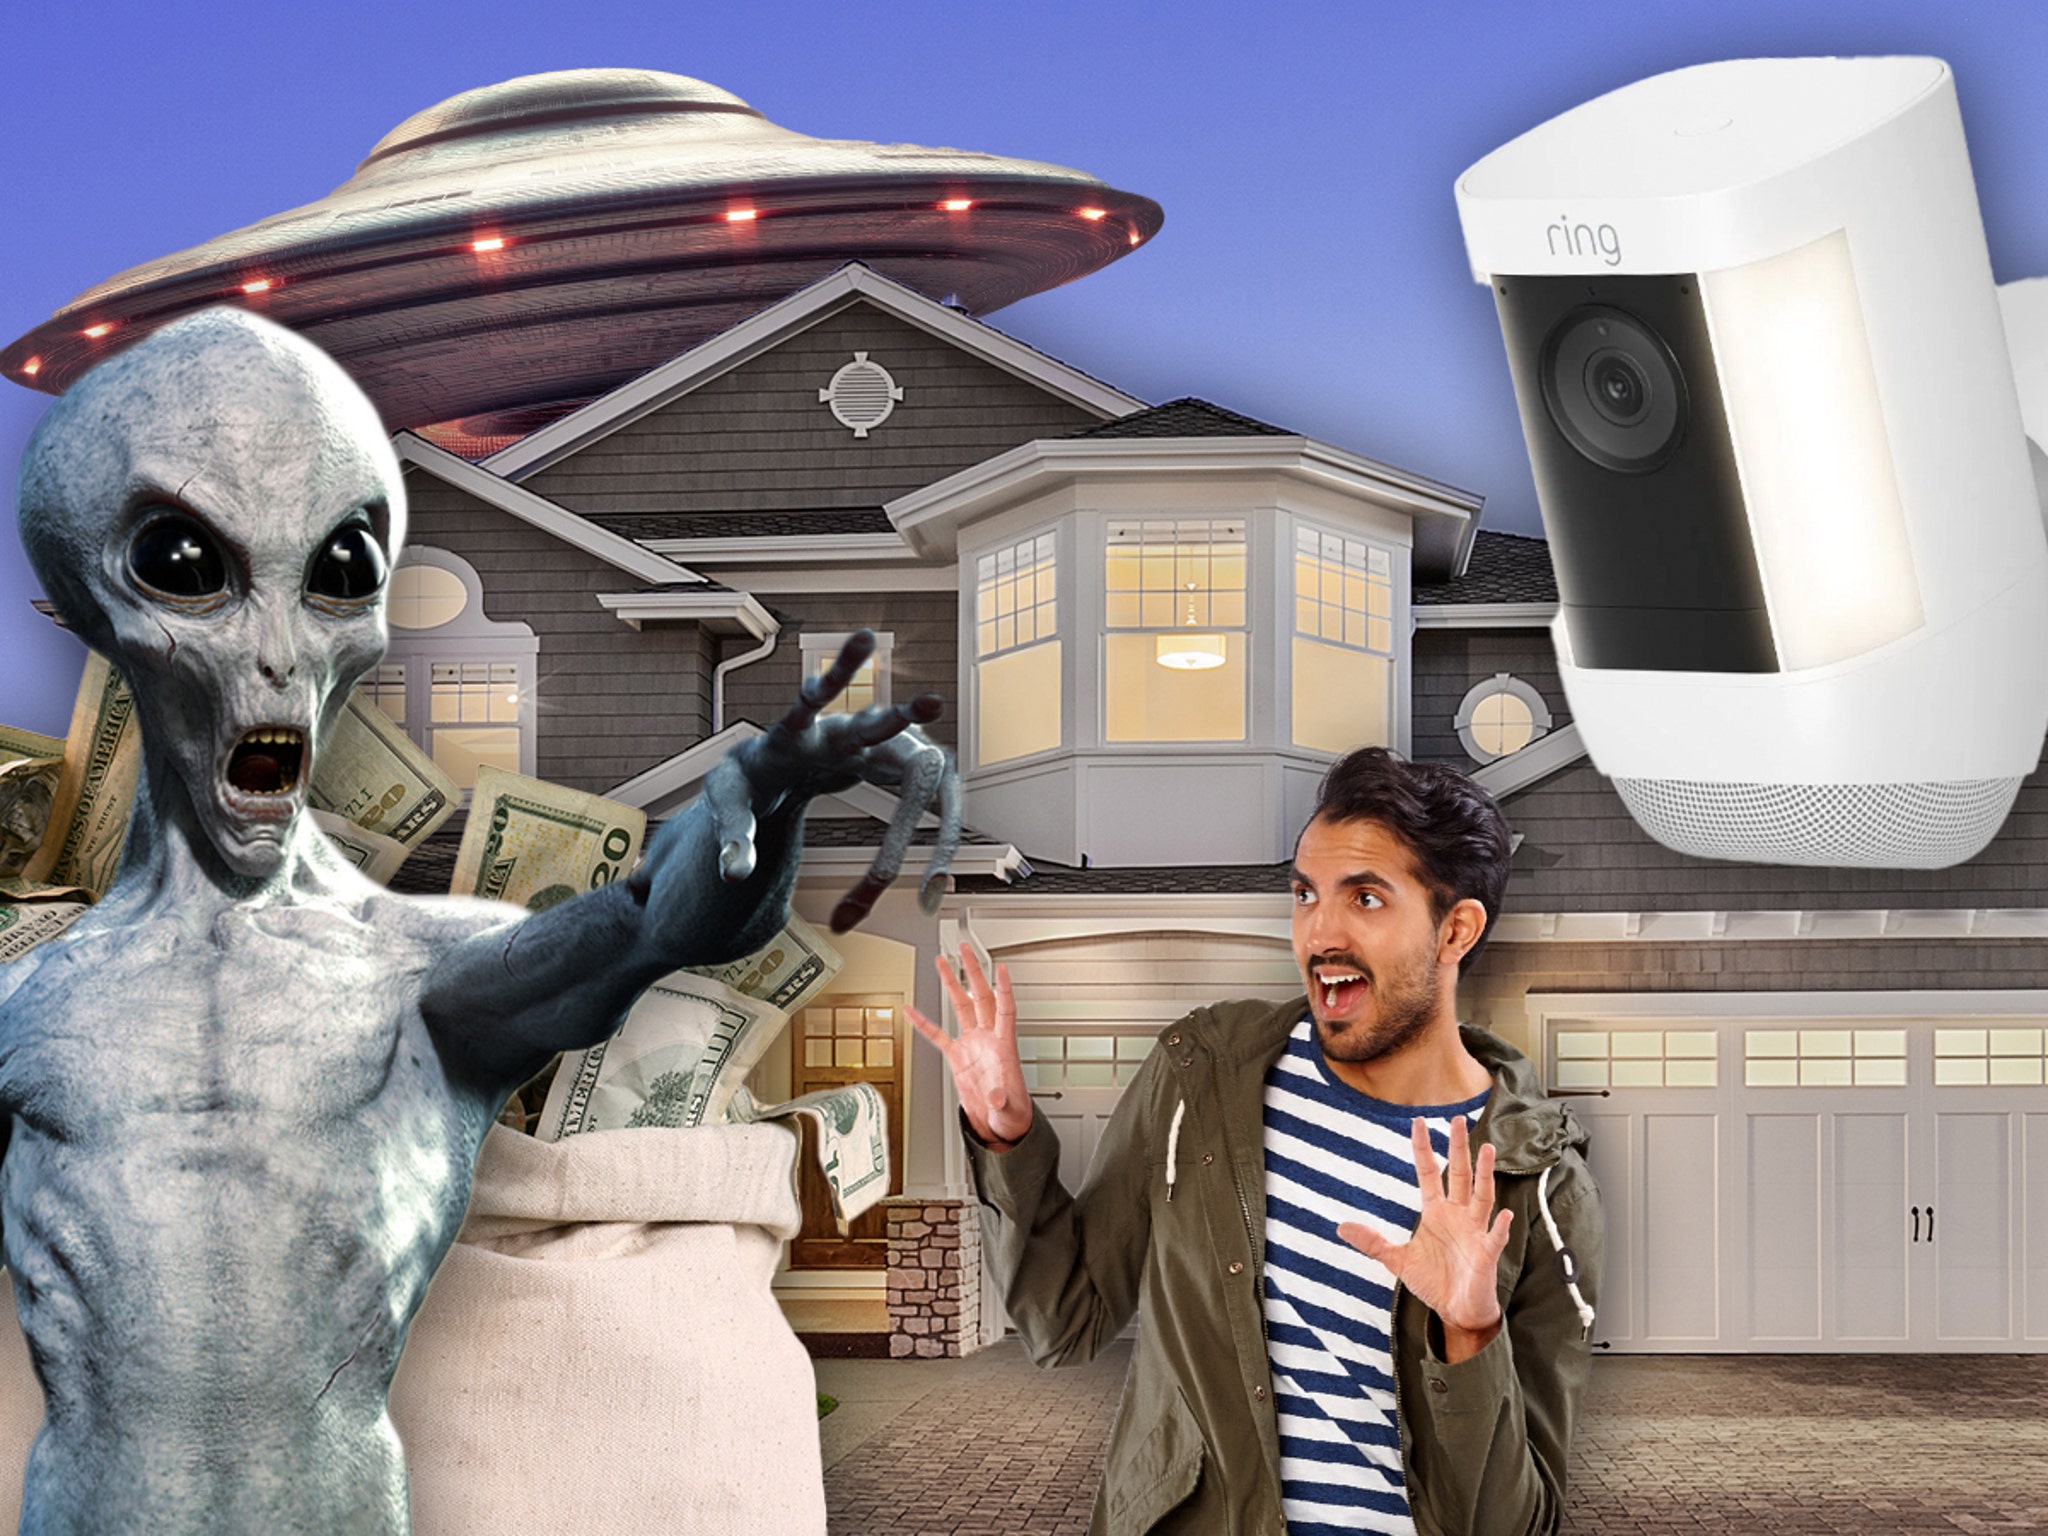 Catch an alien on your Ring camera and win $1 million